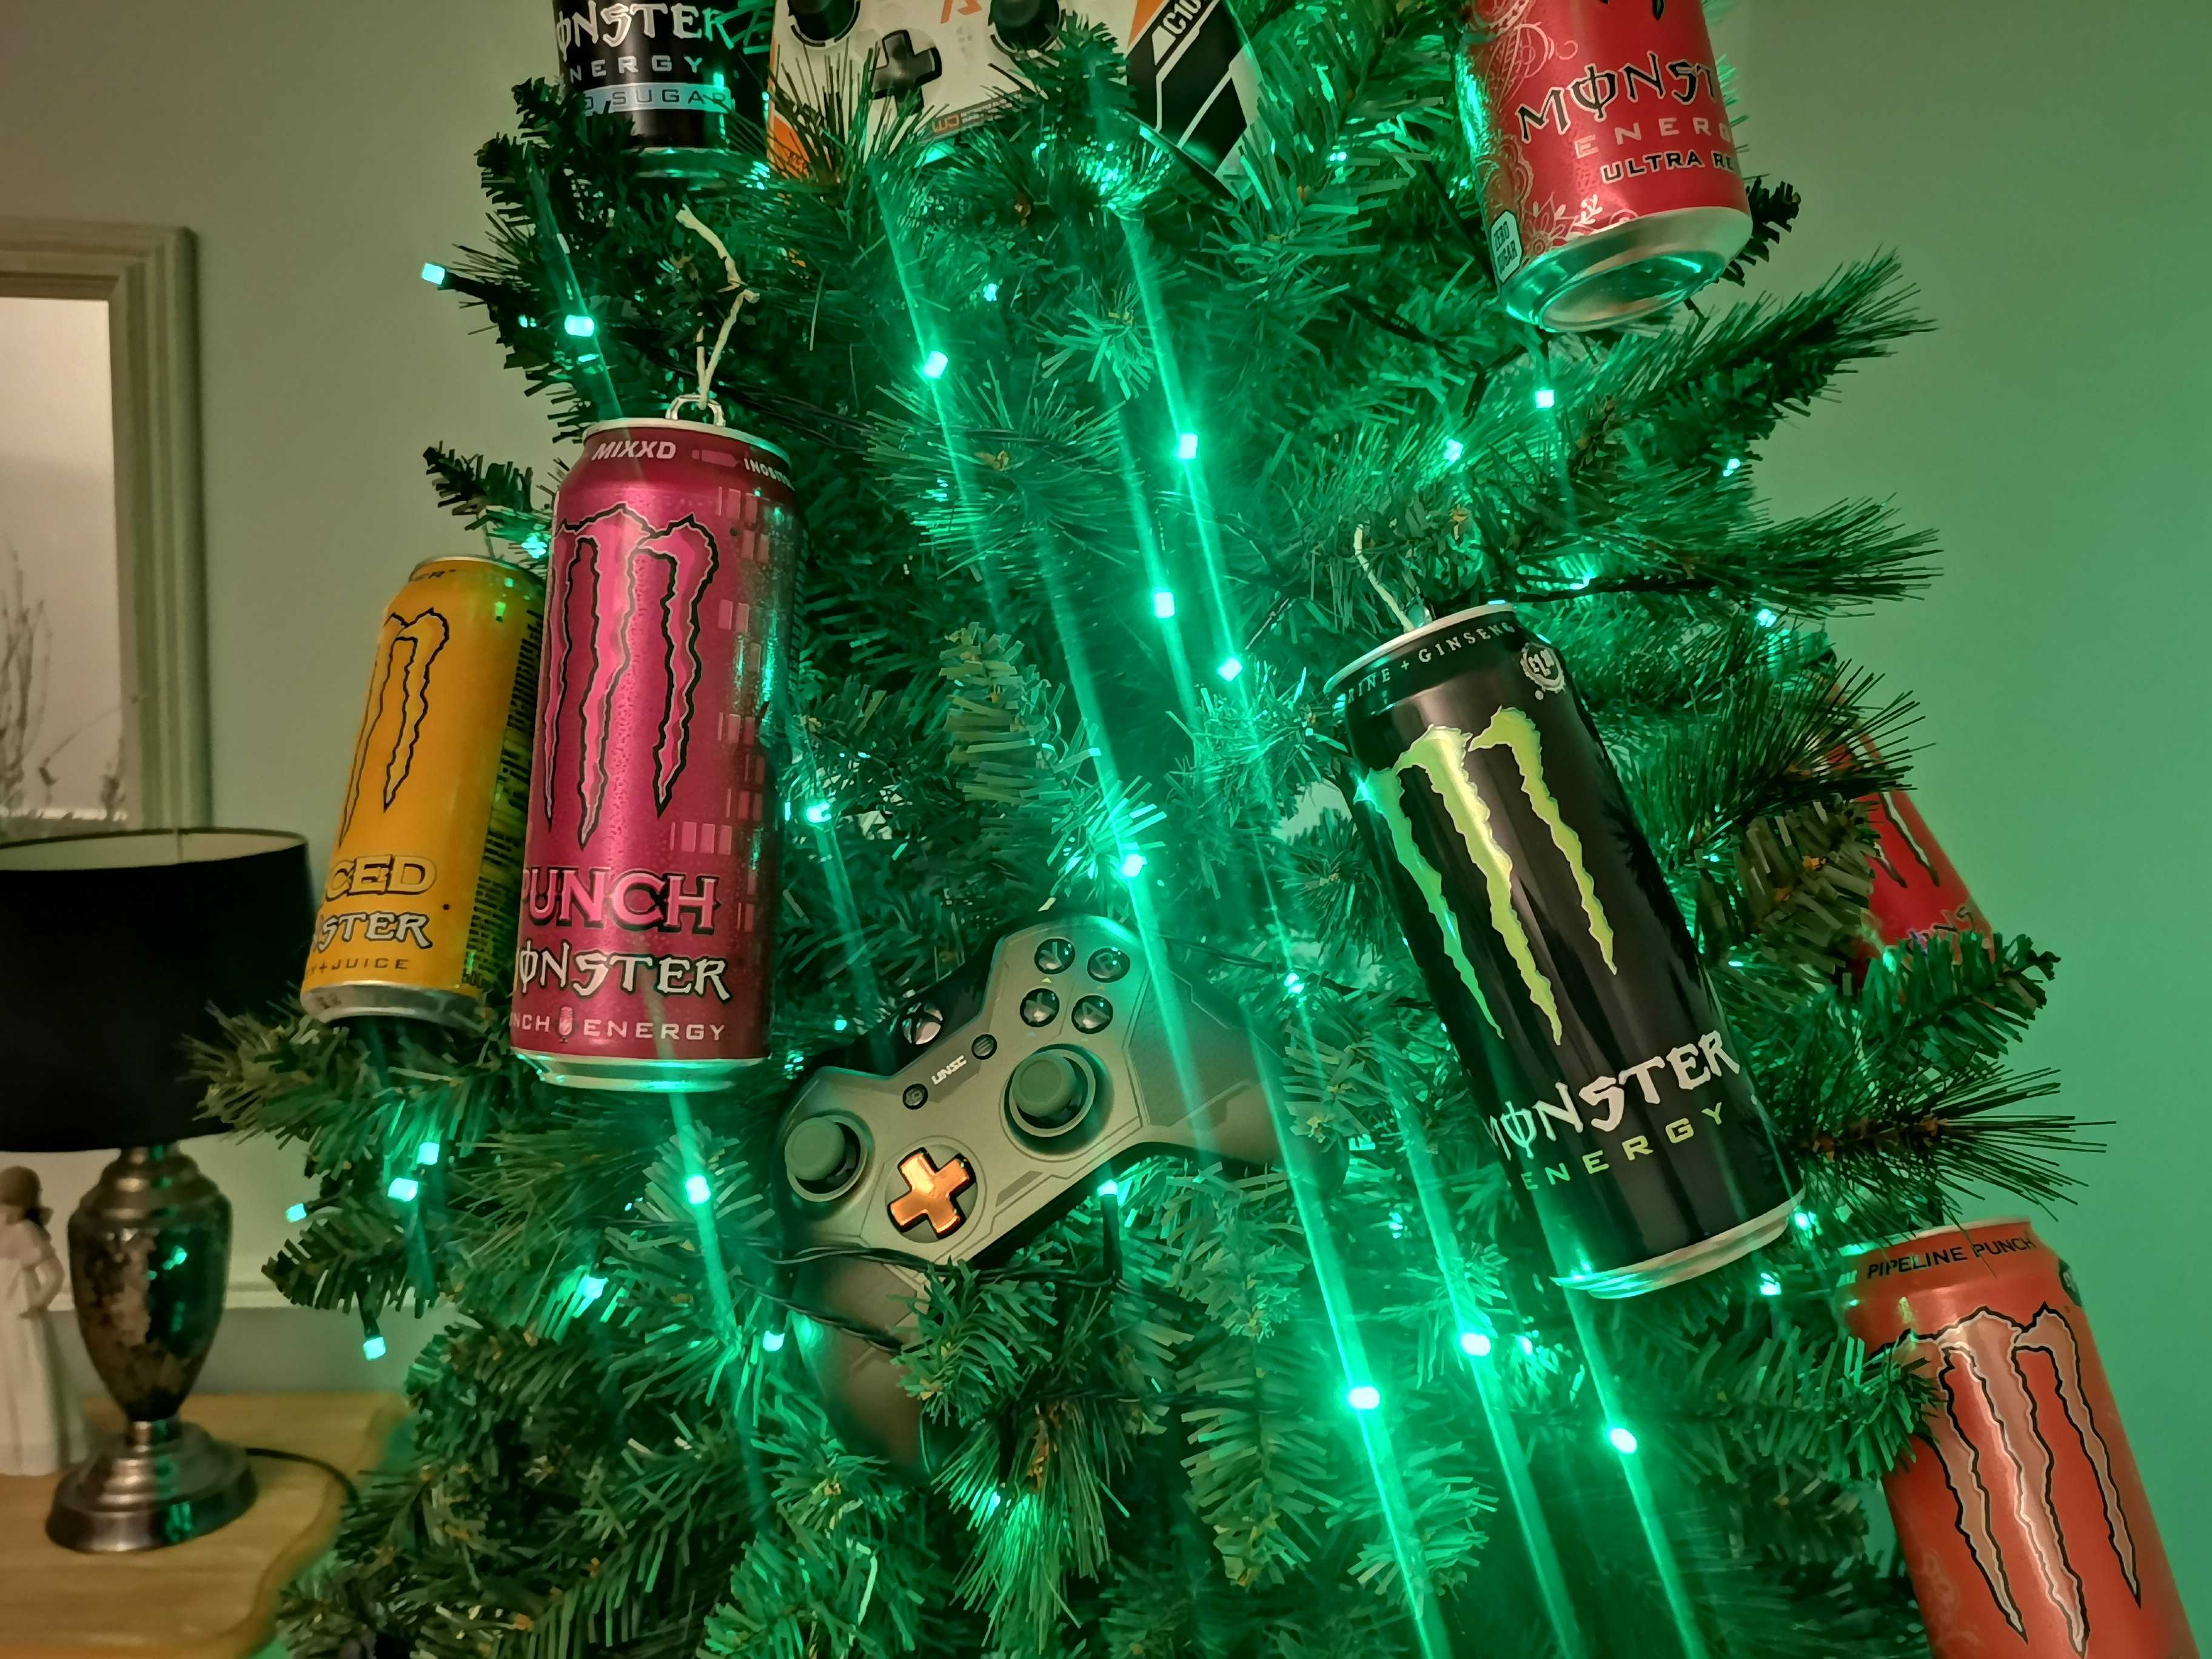 Razer RGB Christmas lights are a thing now, so I created a monster